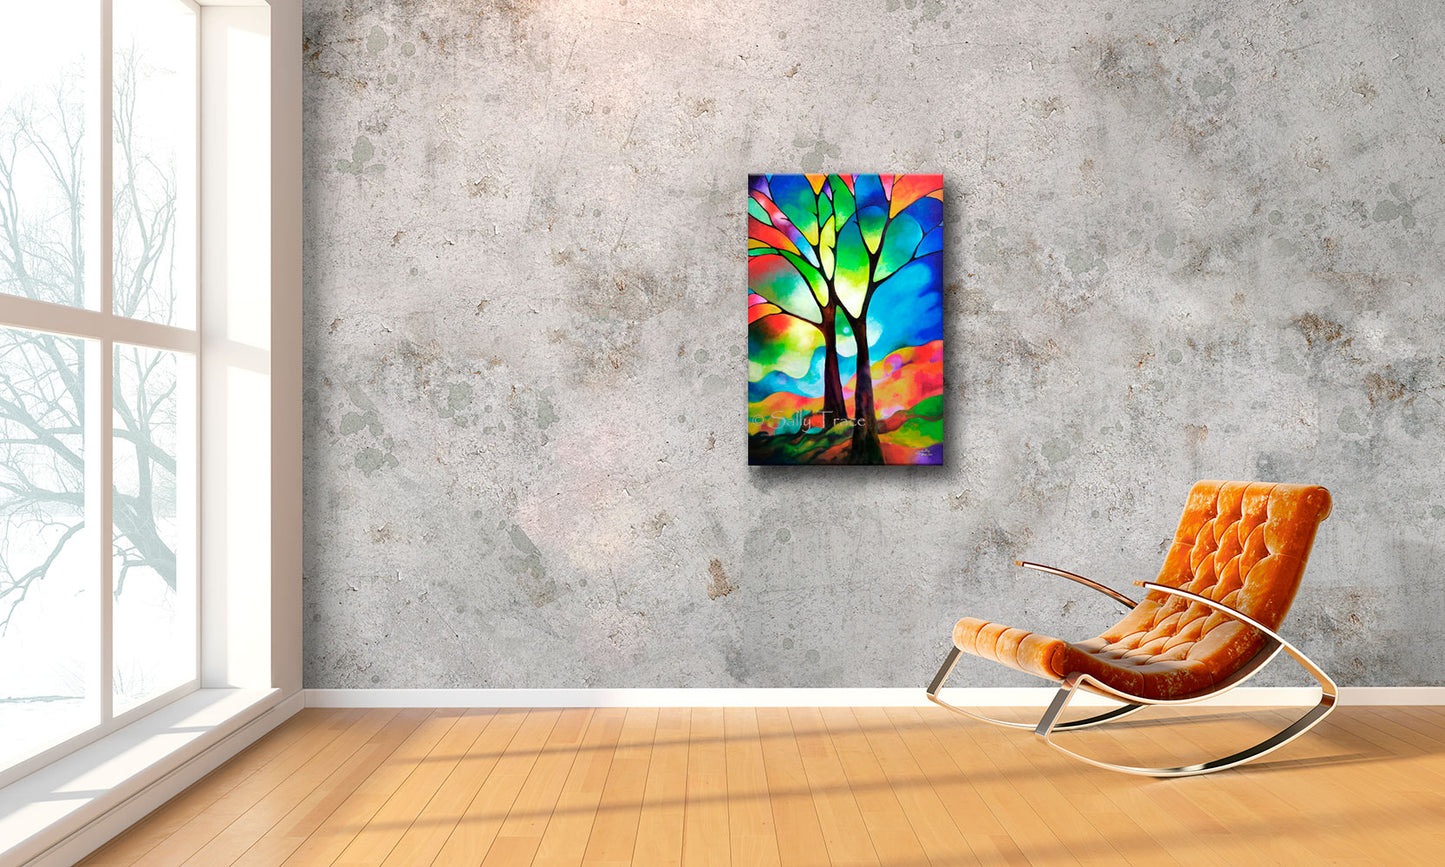 Modern contemporary original paintings for sale, Two Trees by Sally Trace